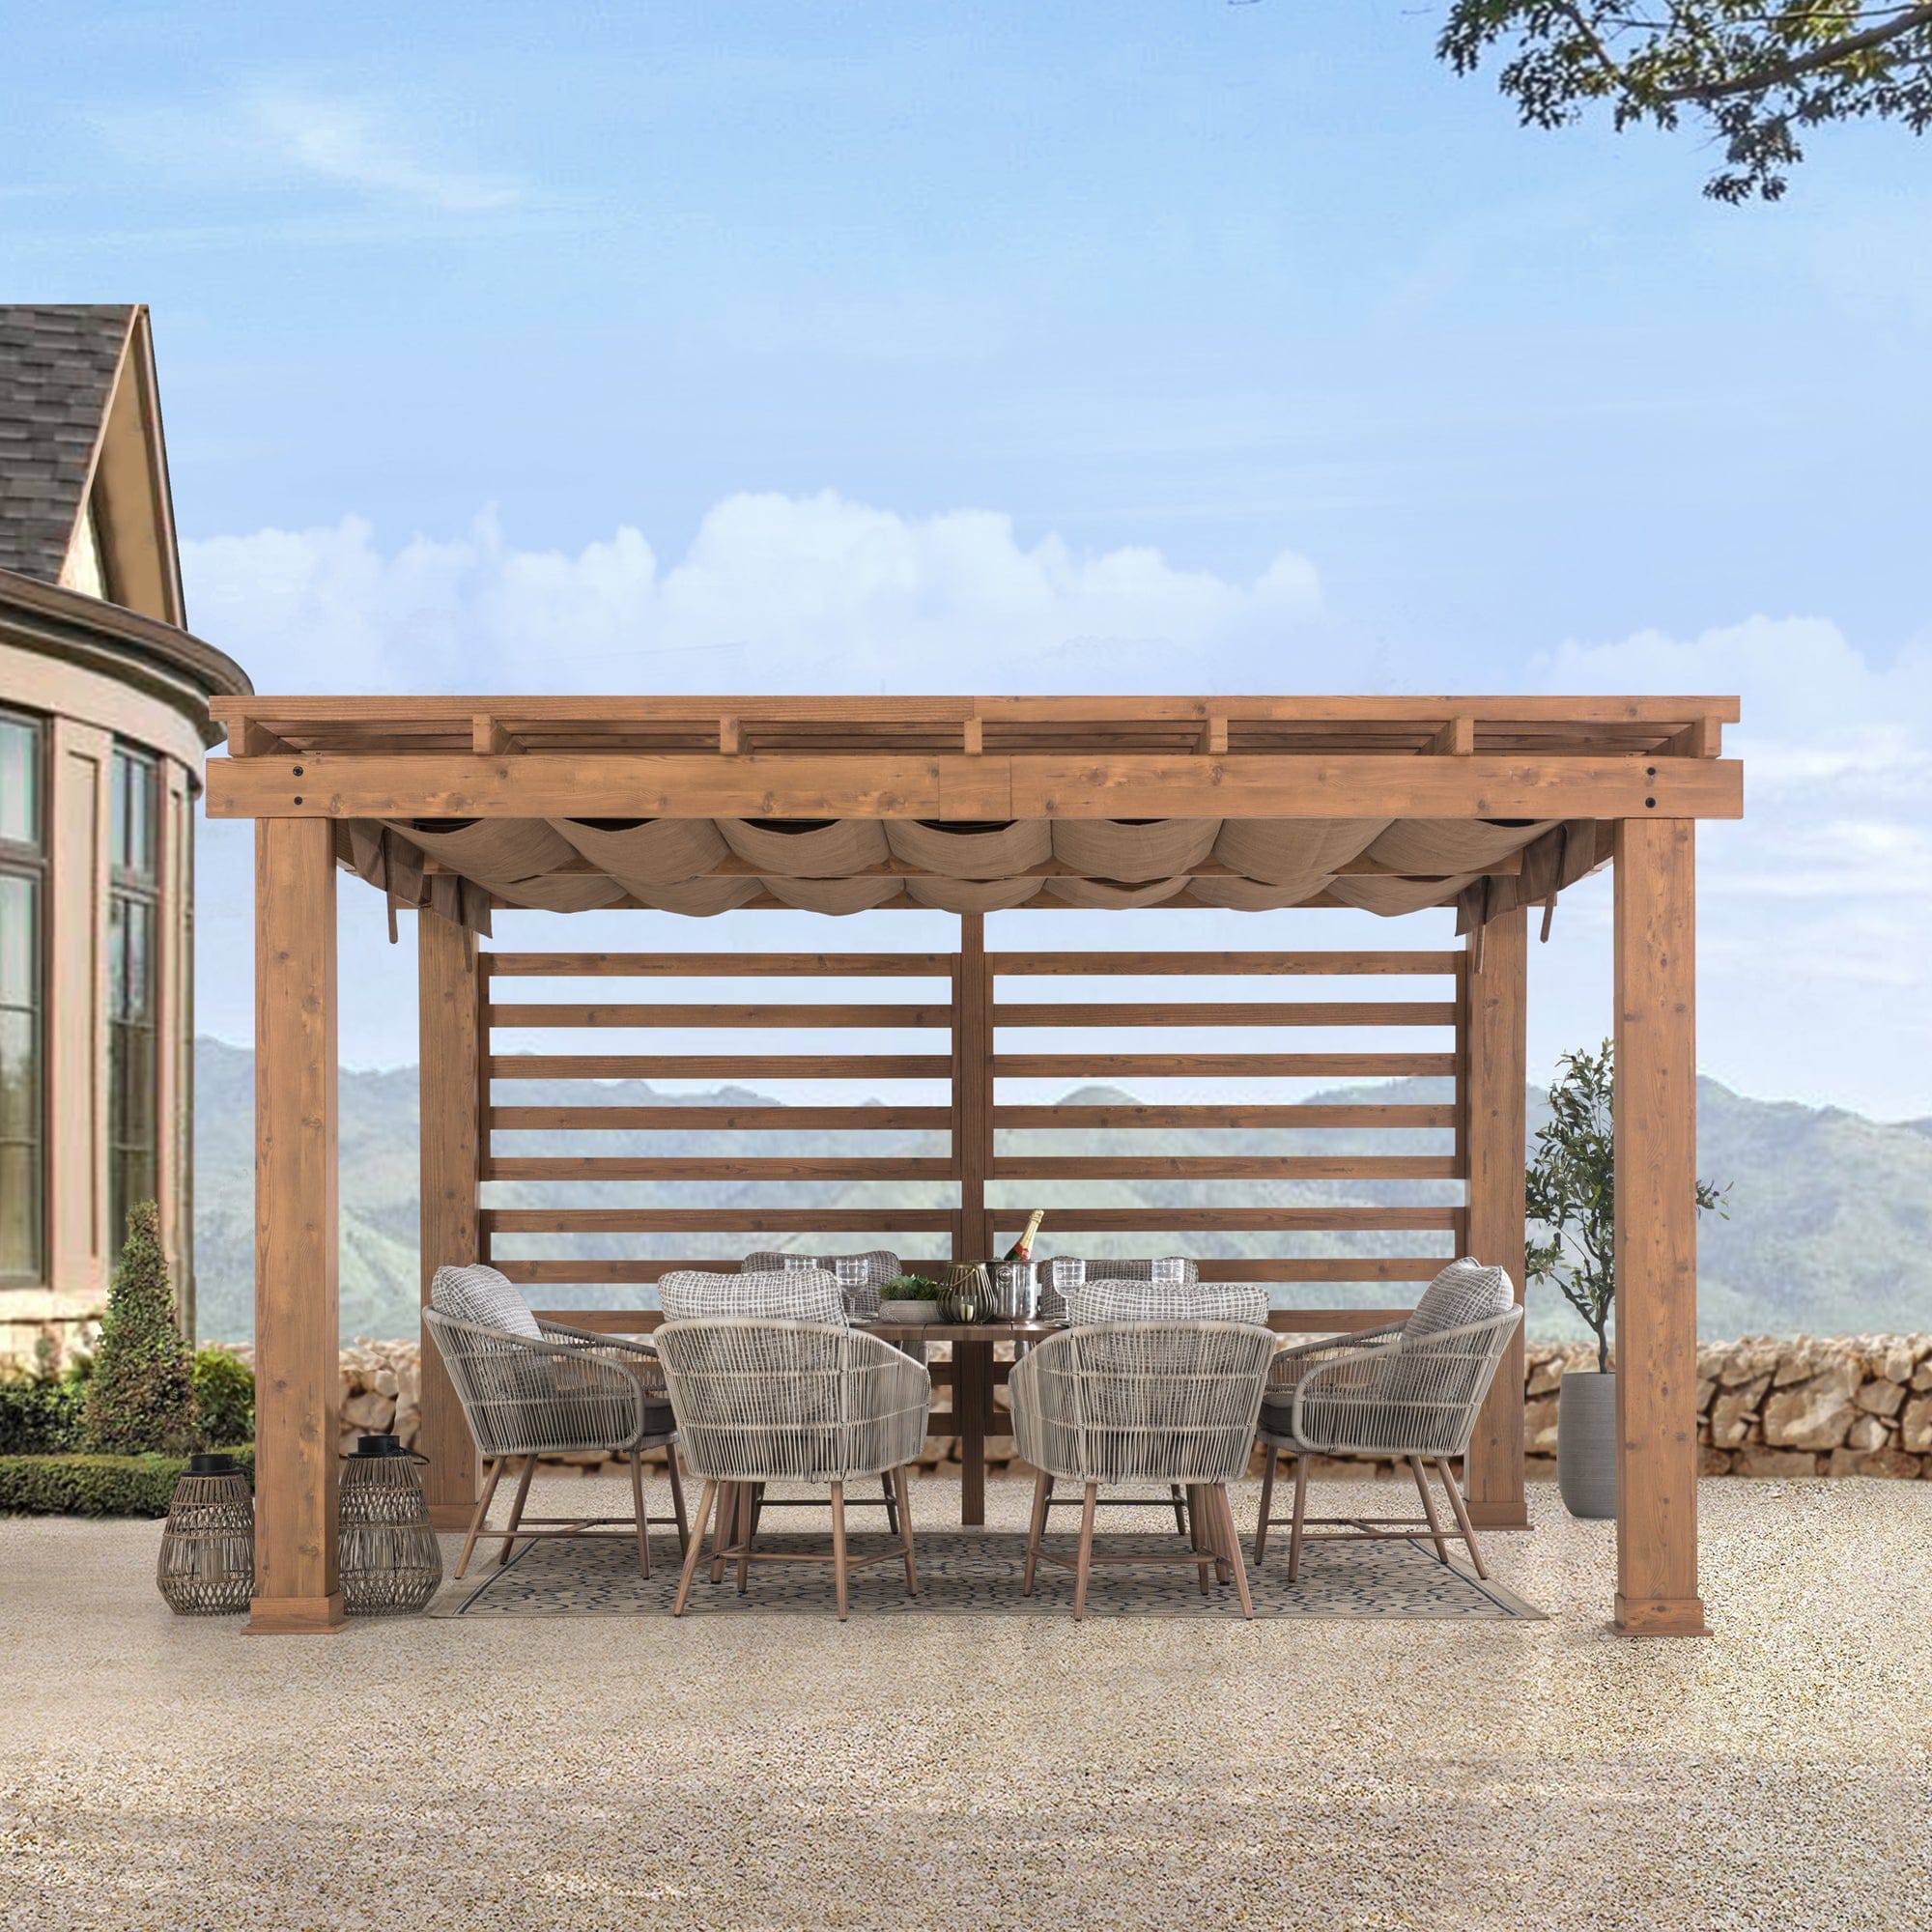 SummerCove 13x11 Steel Frame Pergola Kit with Tan Adjustable Sling Fabric Canopy.